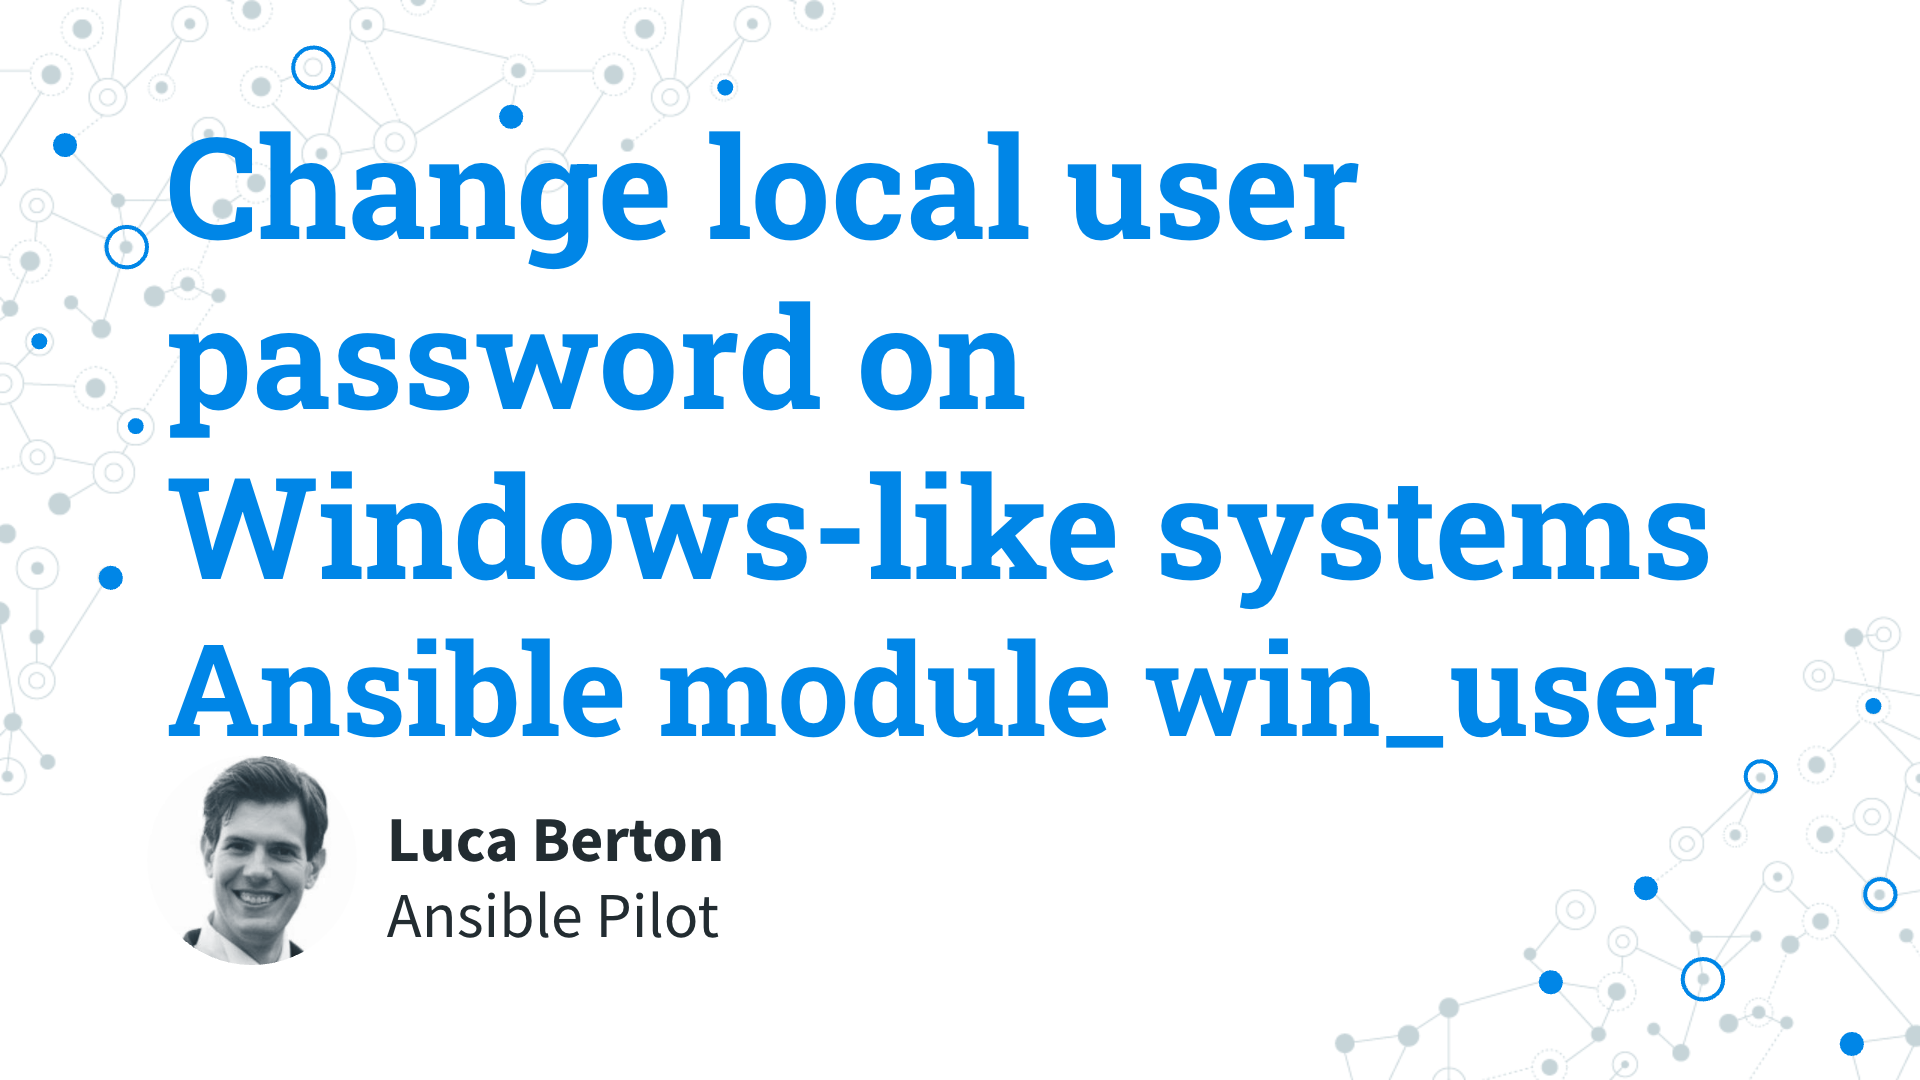 Change local user password on Windows-like systems - Ansible module win_user